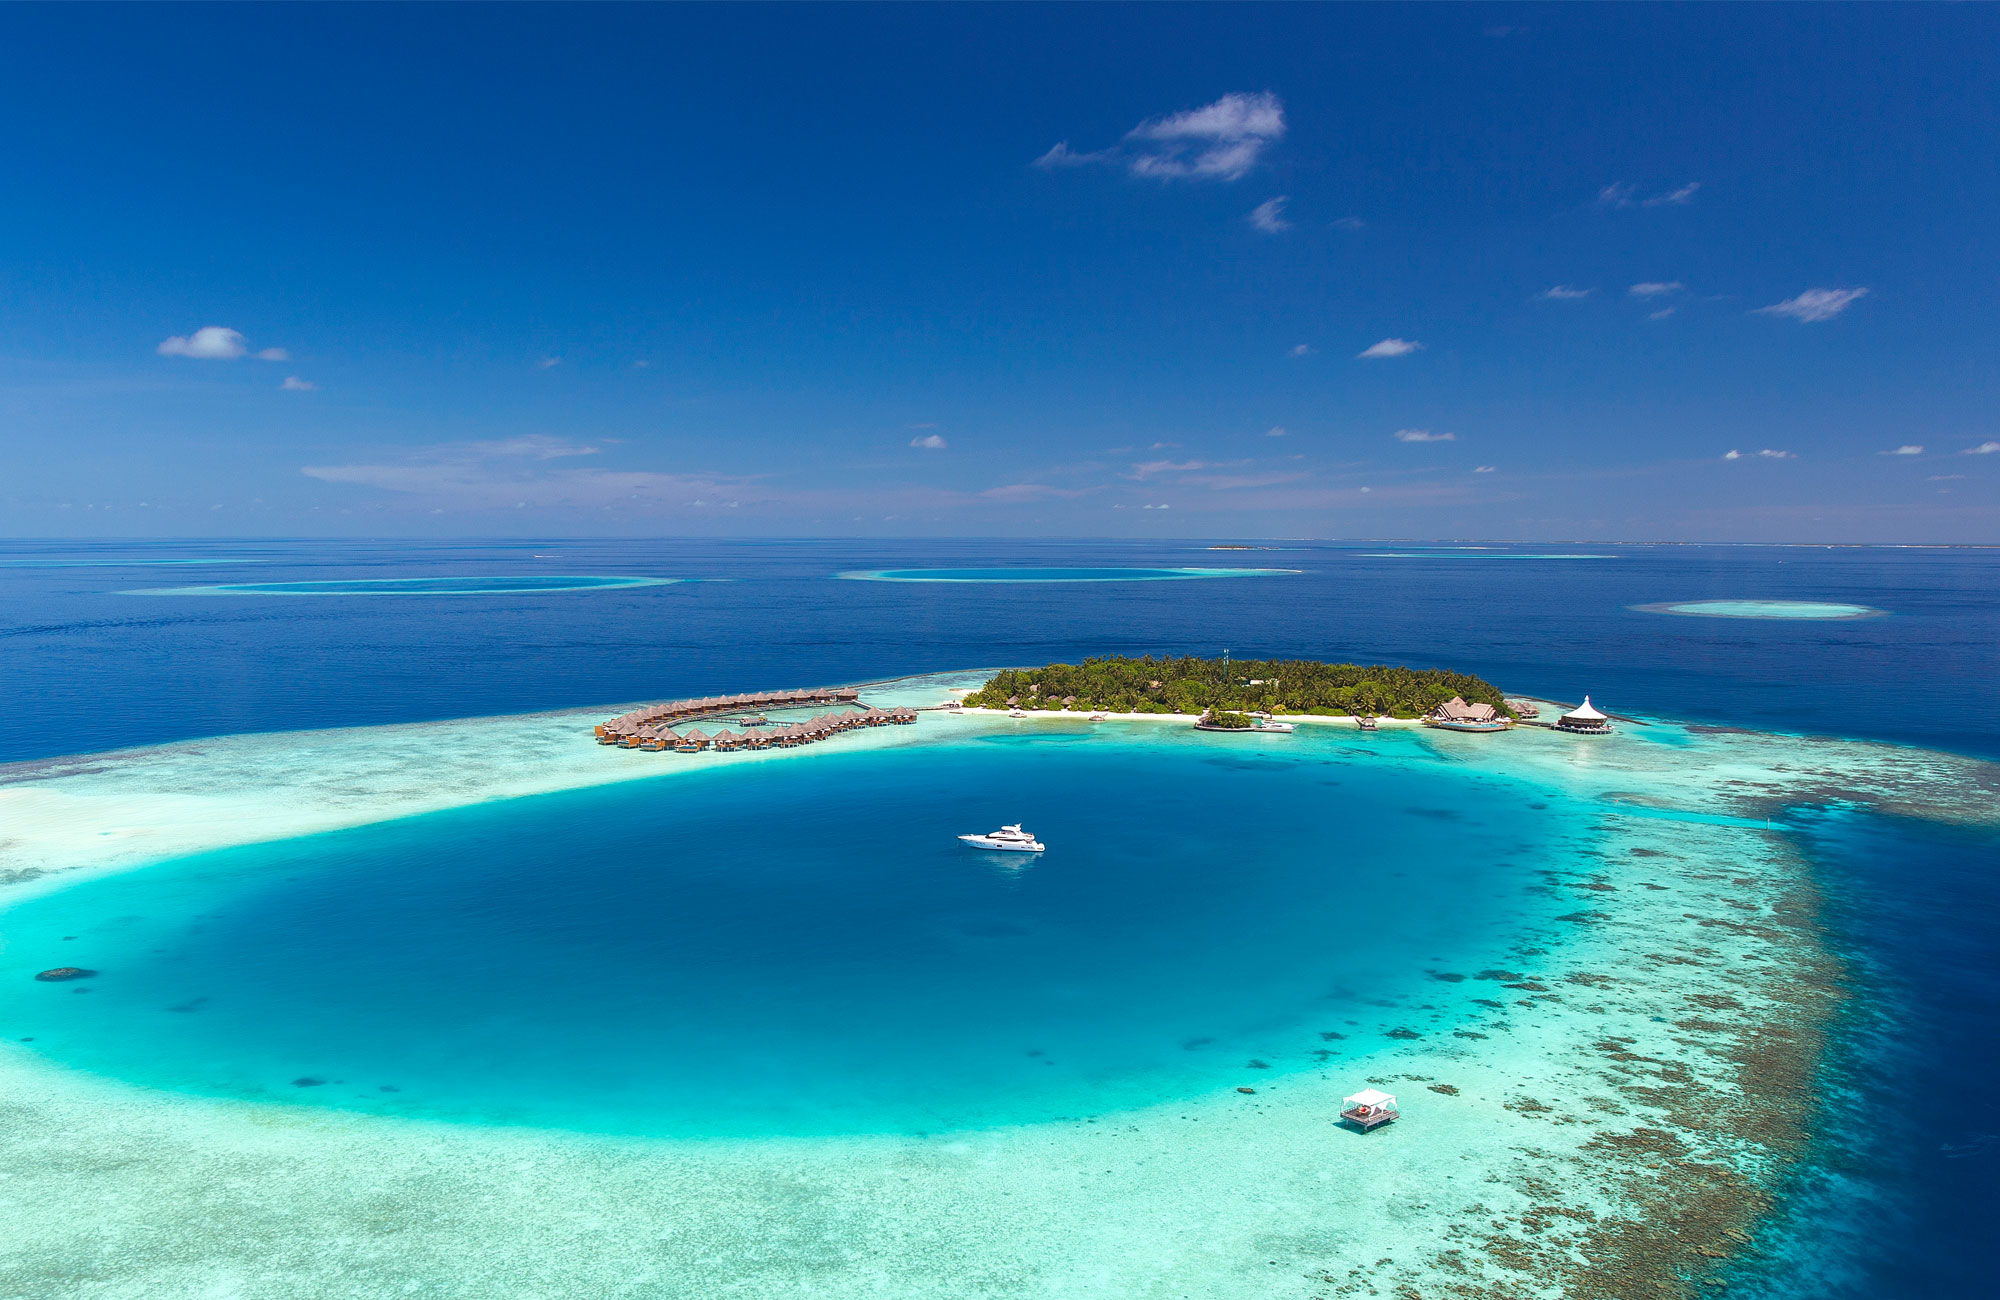 LOOKING FOR YOUR TROPICAL ISLAND HOME? CONSIDER BAROS MALDIVES.